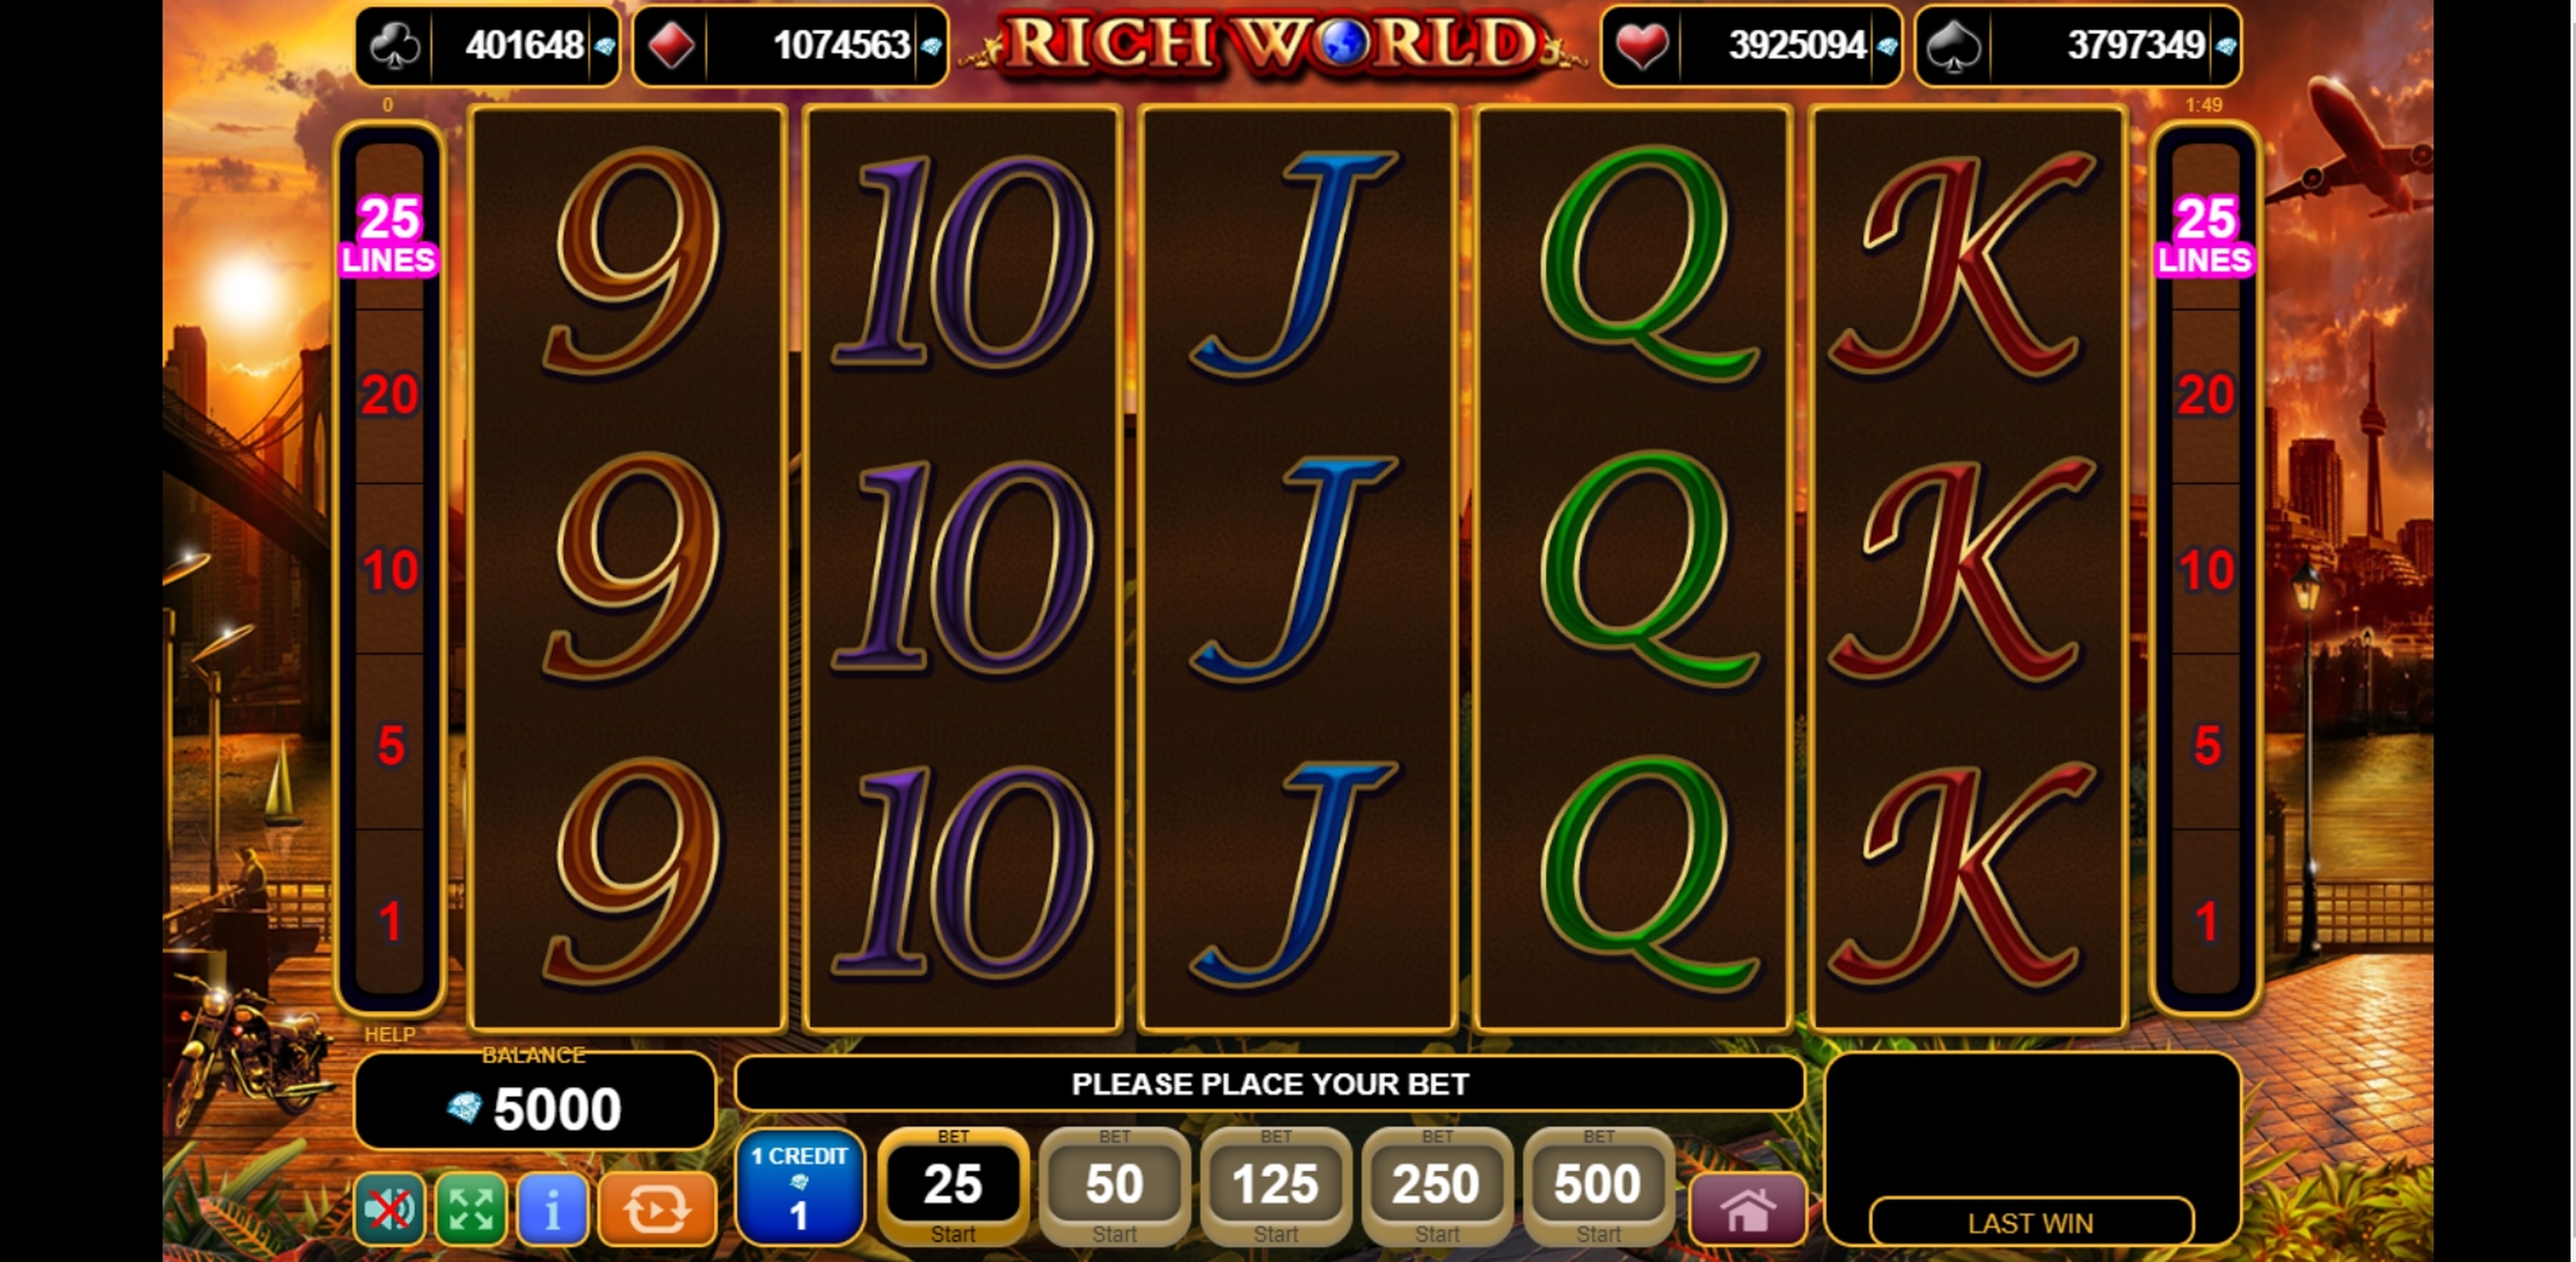 Reels in Rich World Slot Game by EGT